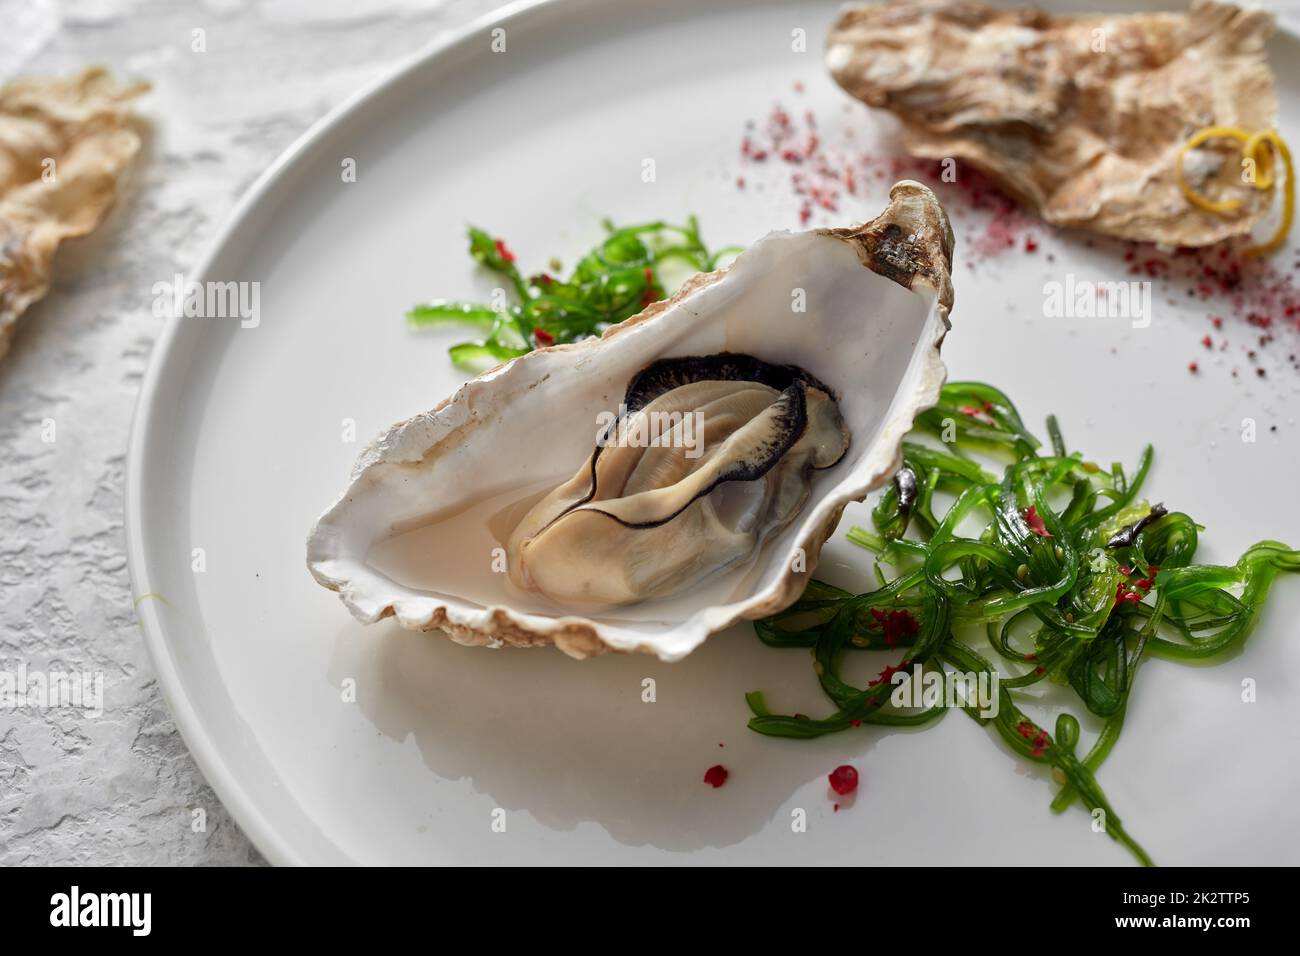 Gourmet oyster with Japanese wakame salad Stock Photo